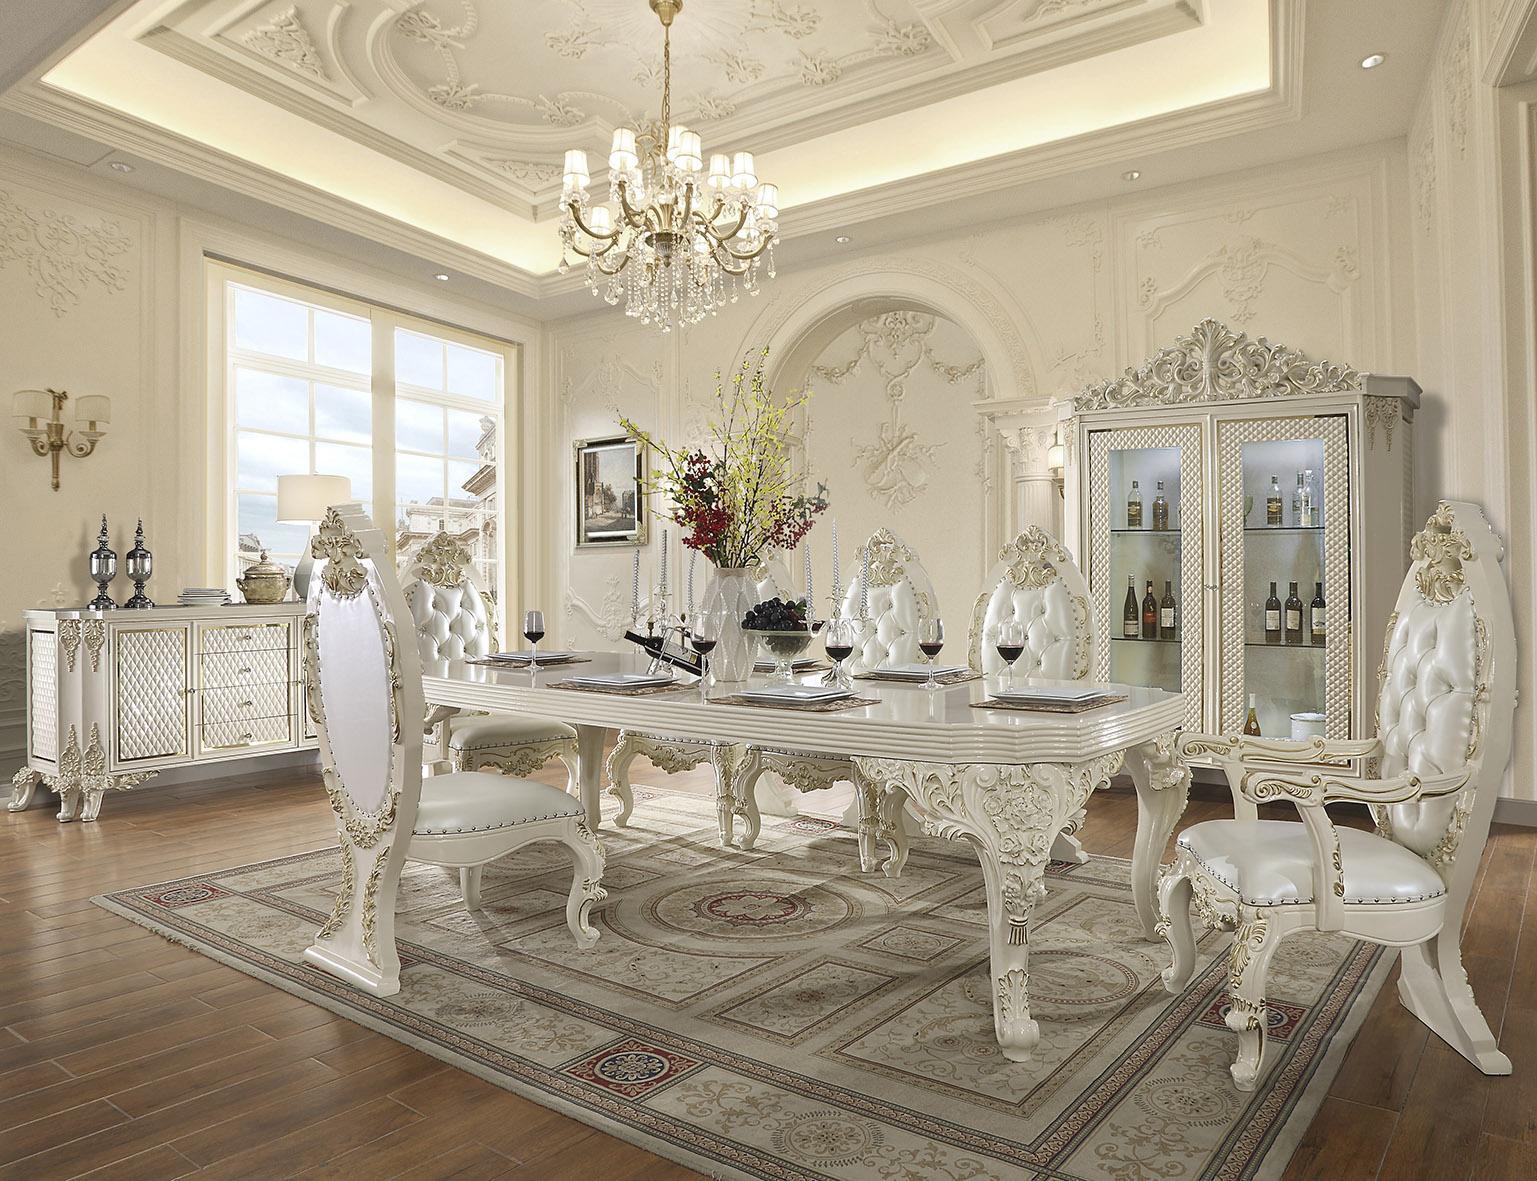 Traditional Dining Table Set HD-8091 HD-DT8091-9PC in Antique White, Gold Leather